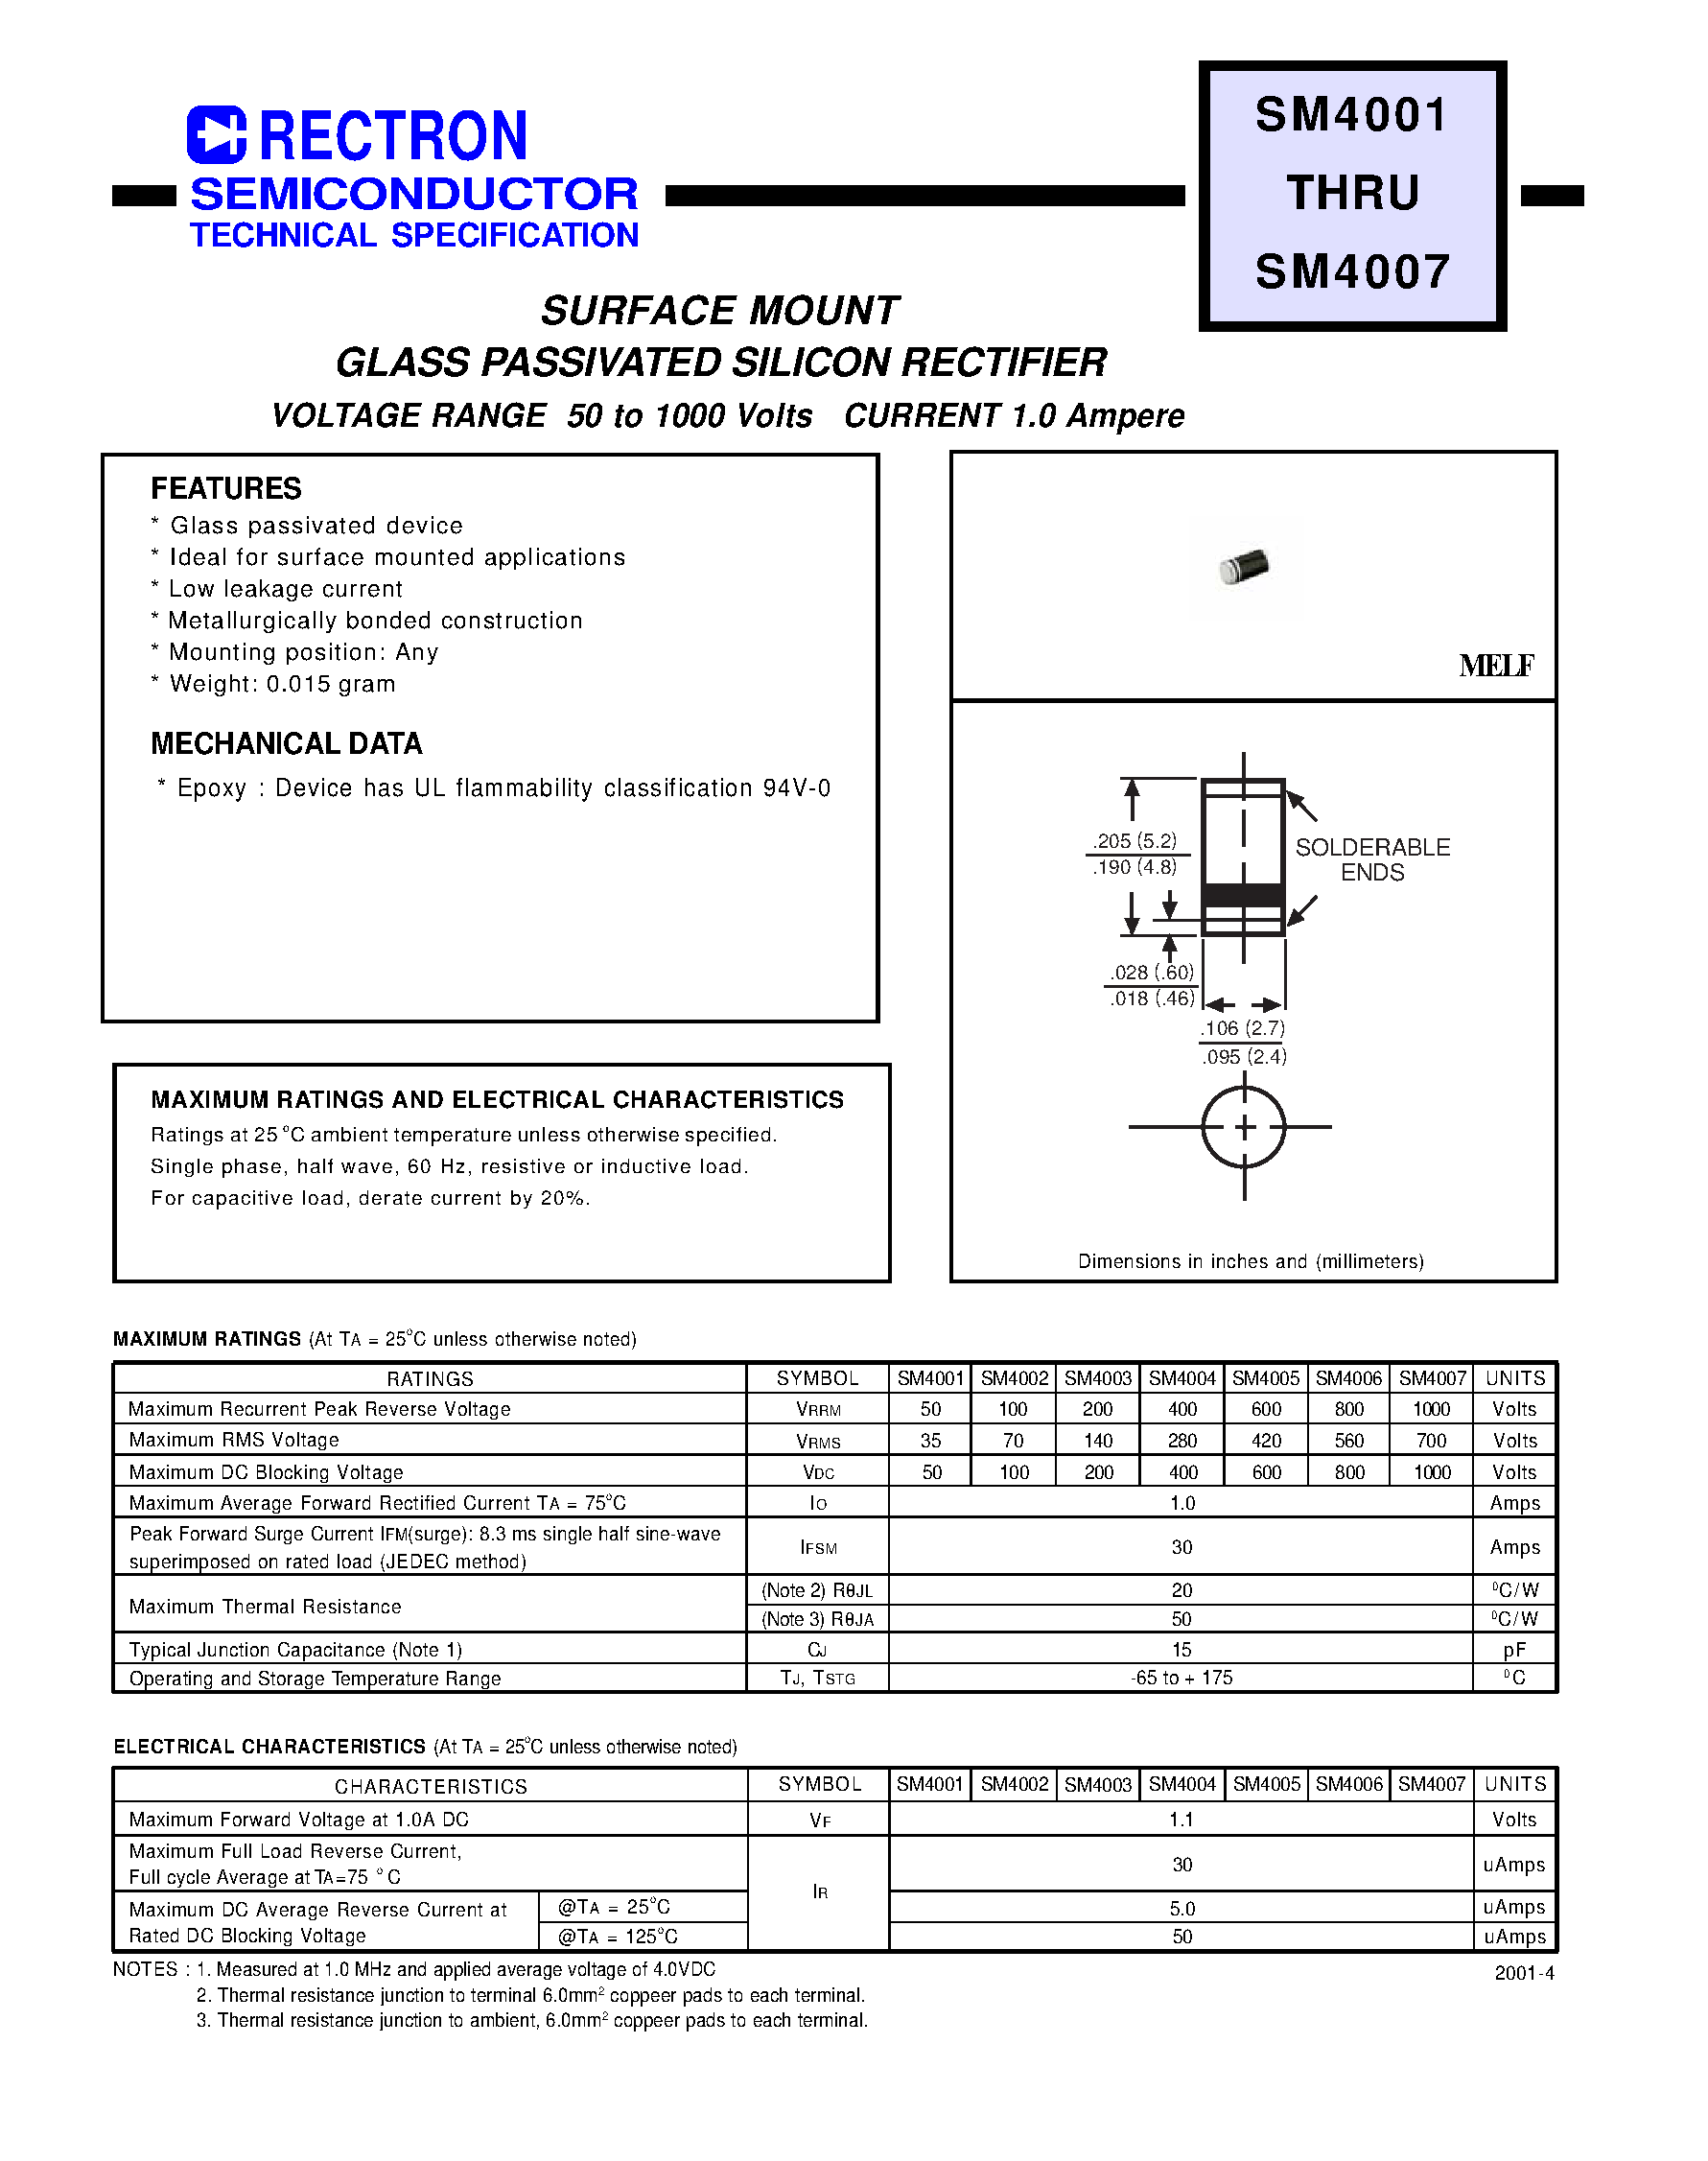 Даташит SM4002 - SURFACE MOUNT GLASS PASSIVATED SILICON RECTIFIER (VOLTAGE RANGE 50 to 1000 Volts CURRENT 1.0 Ampere) страница 1